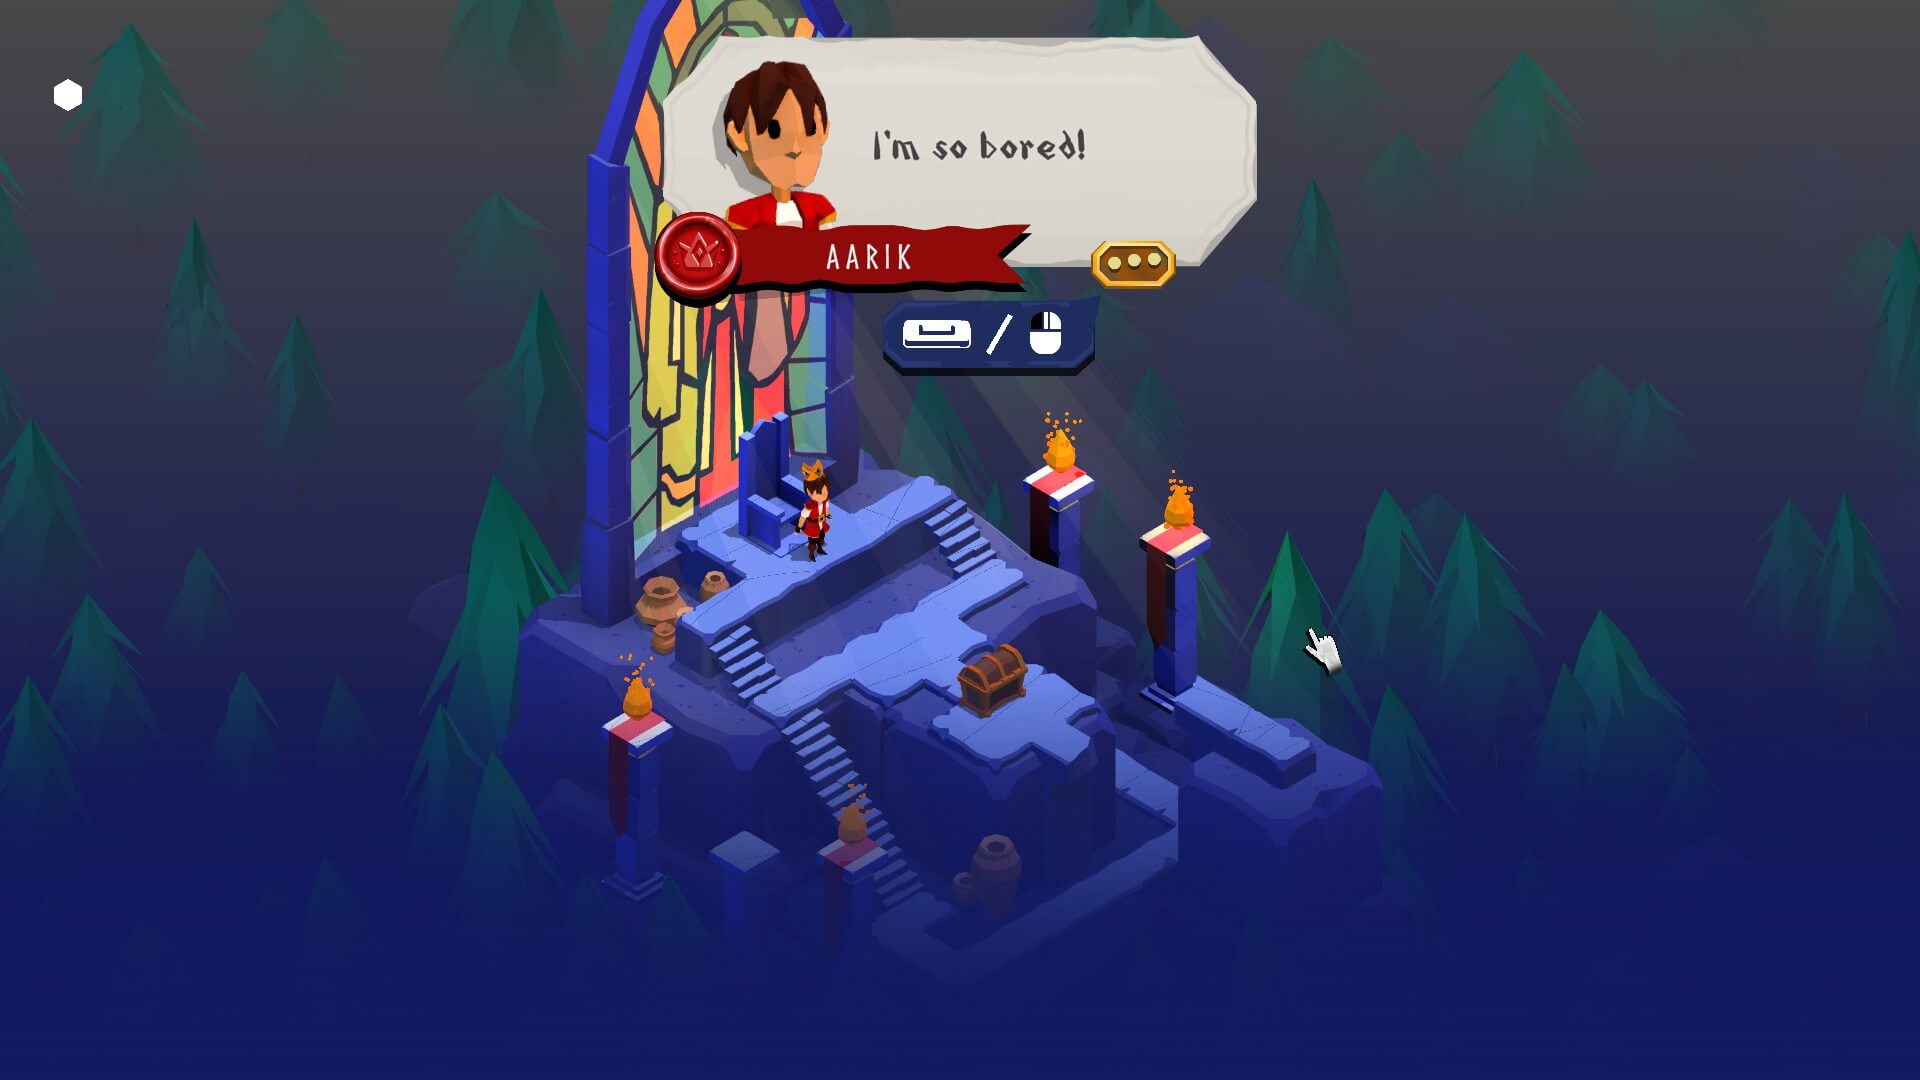 Aarik is standing in front of a throne. In a speech bubble above his head he says that he is bored, preceding the tutorial to help players learn the game controls